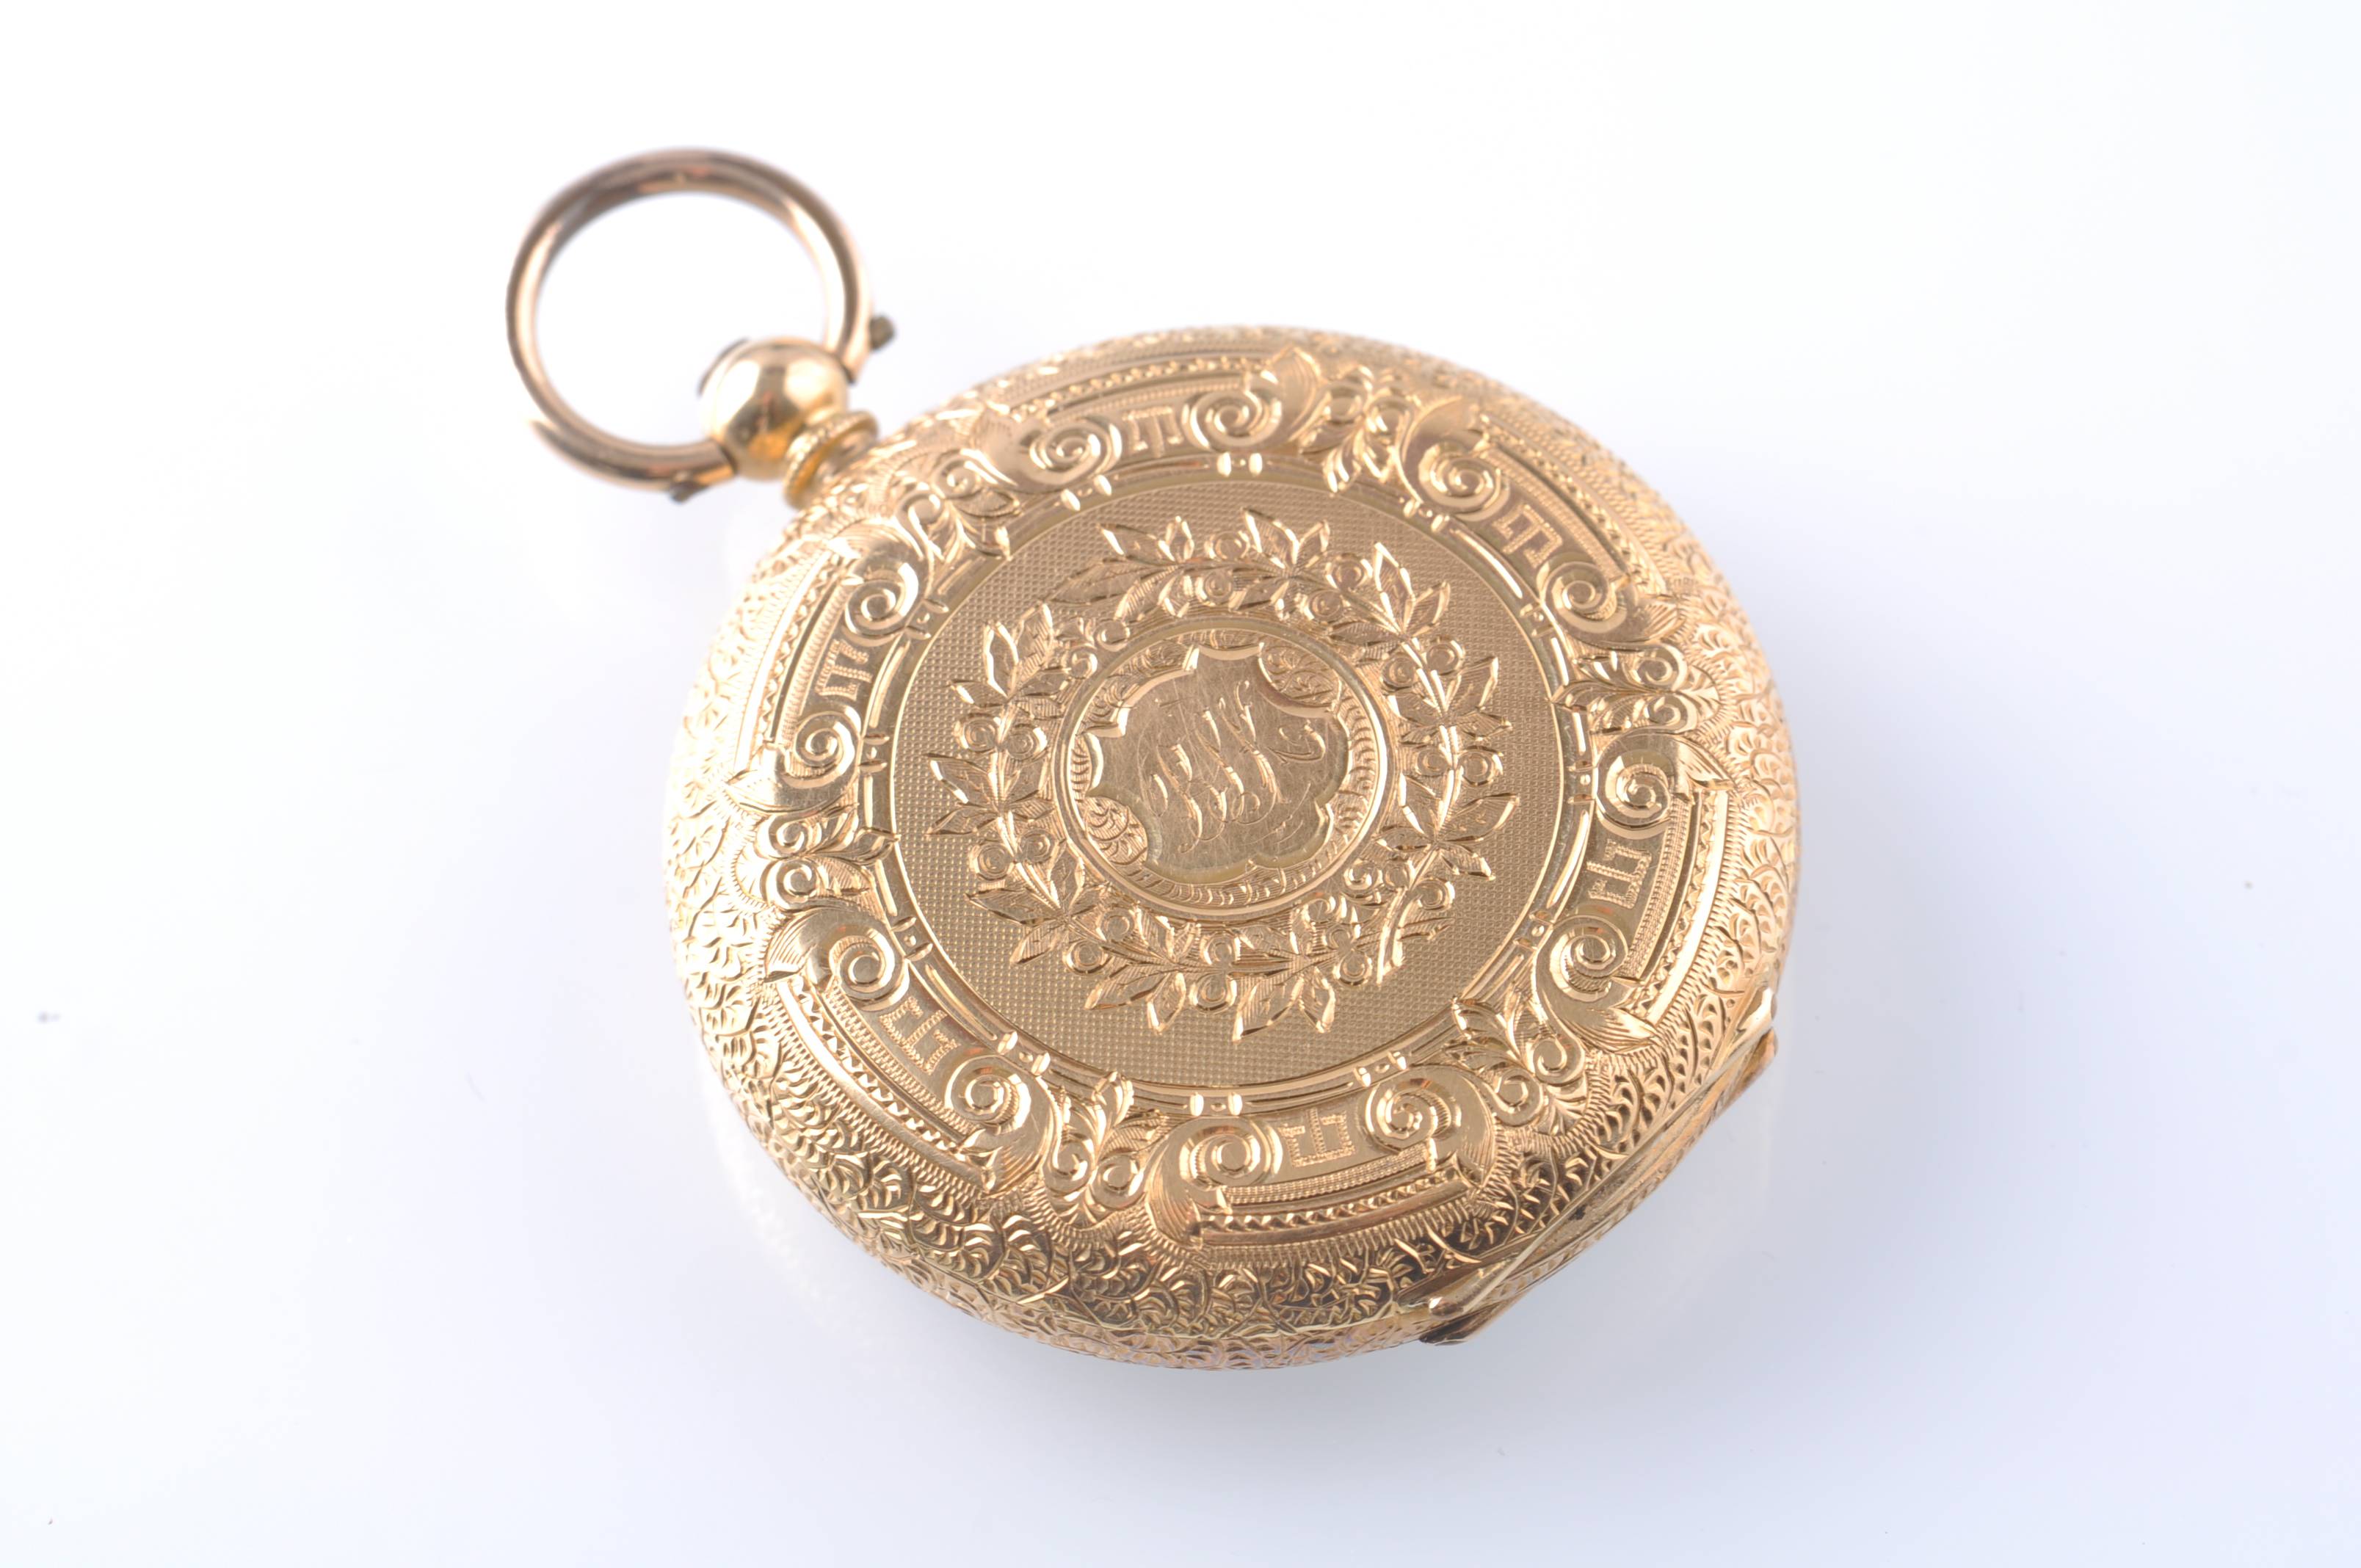 EARLY 20TH CENTURY 18CT GOLD OPEN FACED KEY WIND POCKET WATCH - Image 3 of 6